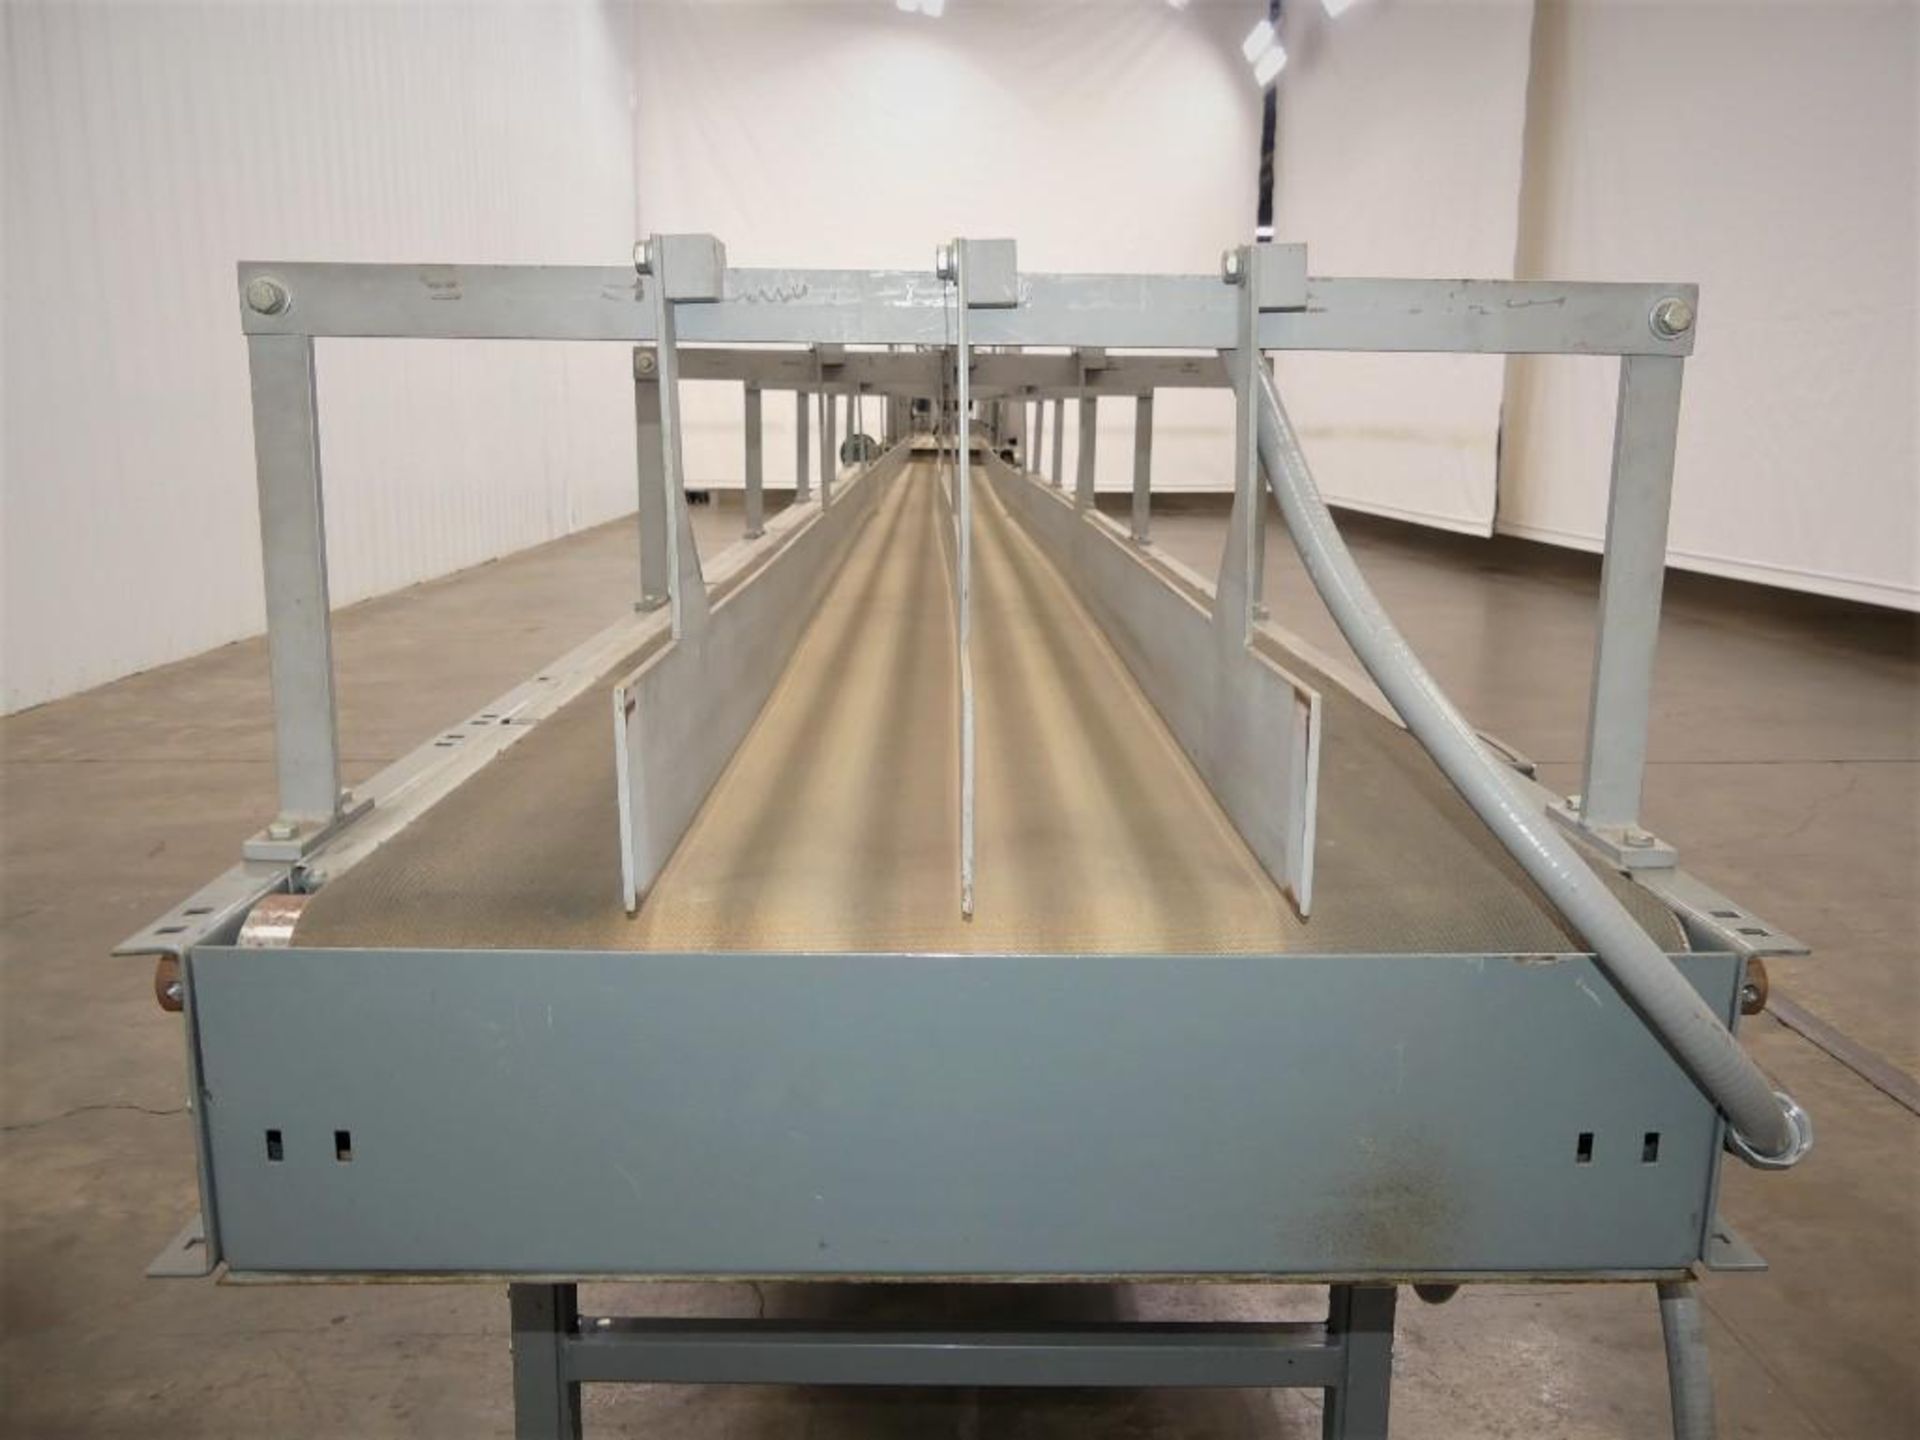 2008 Pearson BE60 6-Pack Beverage Carrier Erector with Twin Lane Conveyor - Image 22 of 39